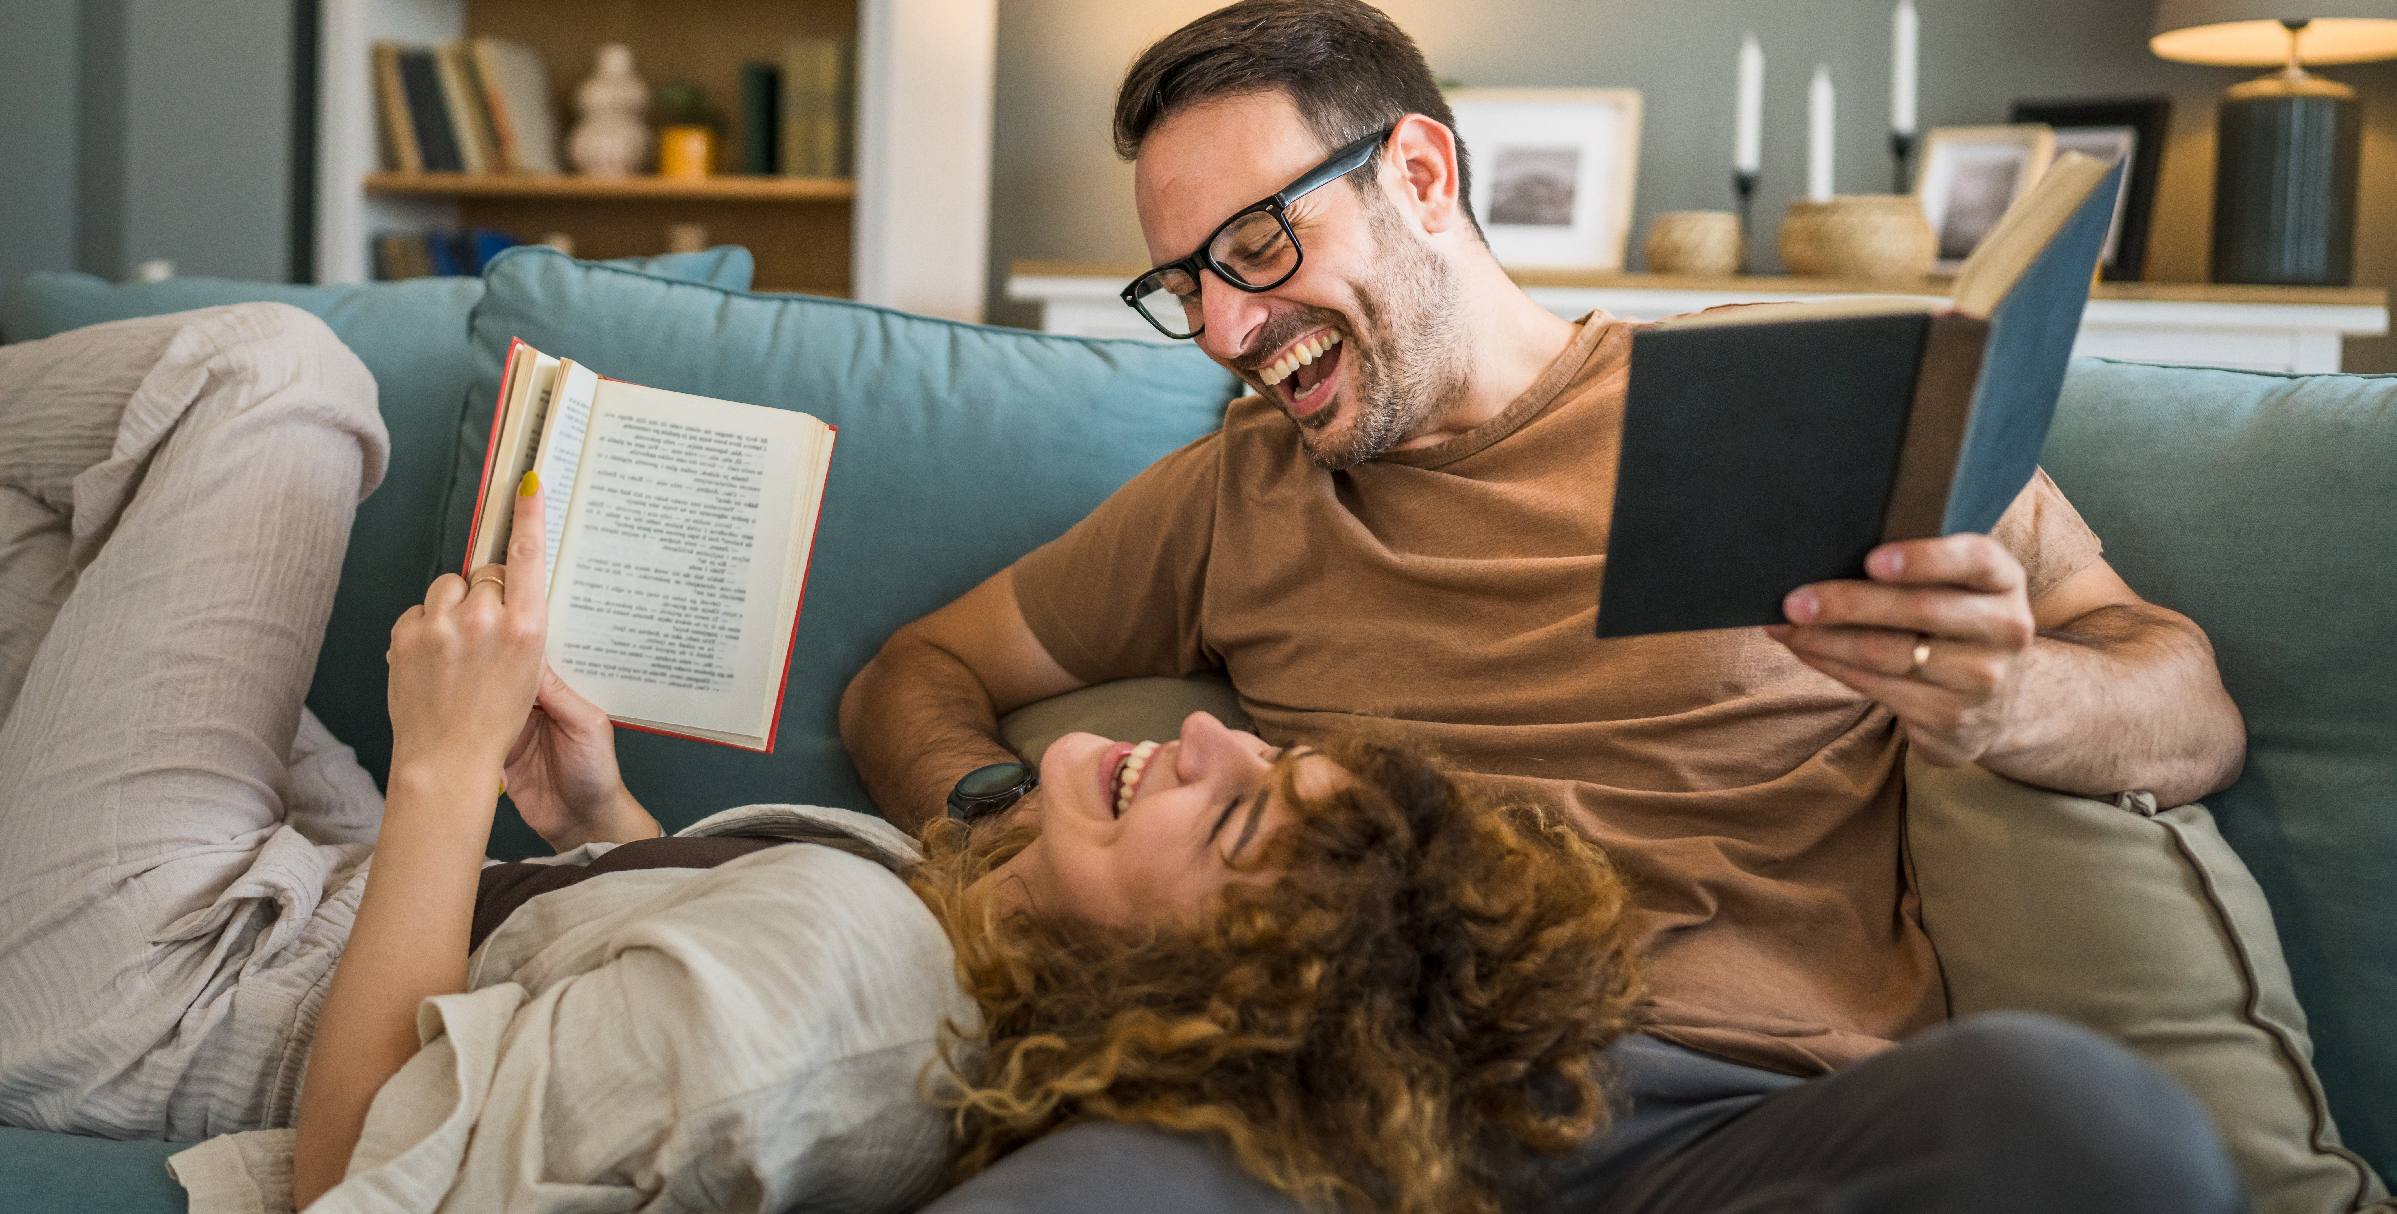 Couple laughing and reading together